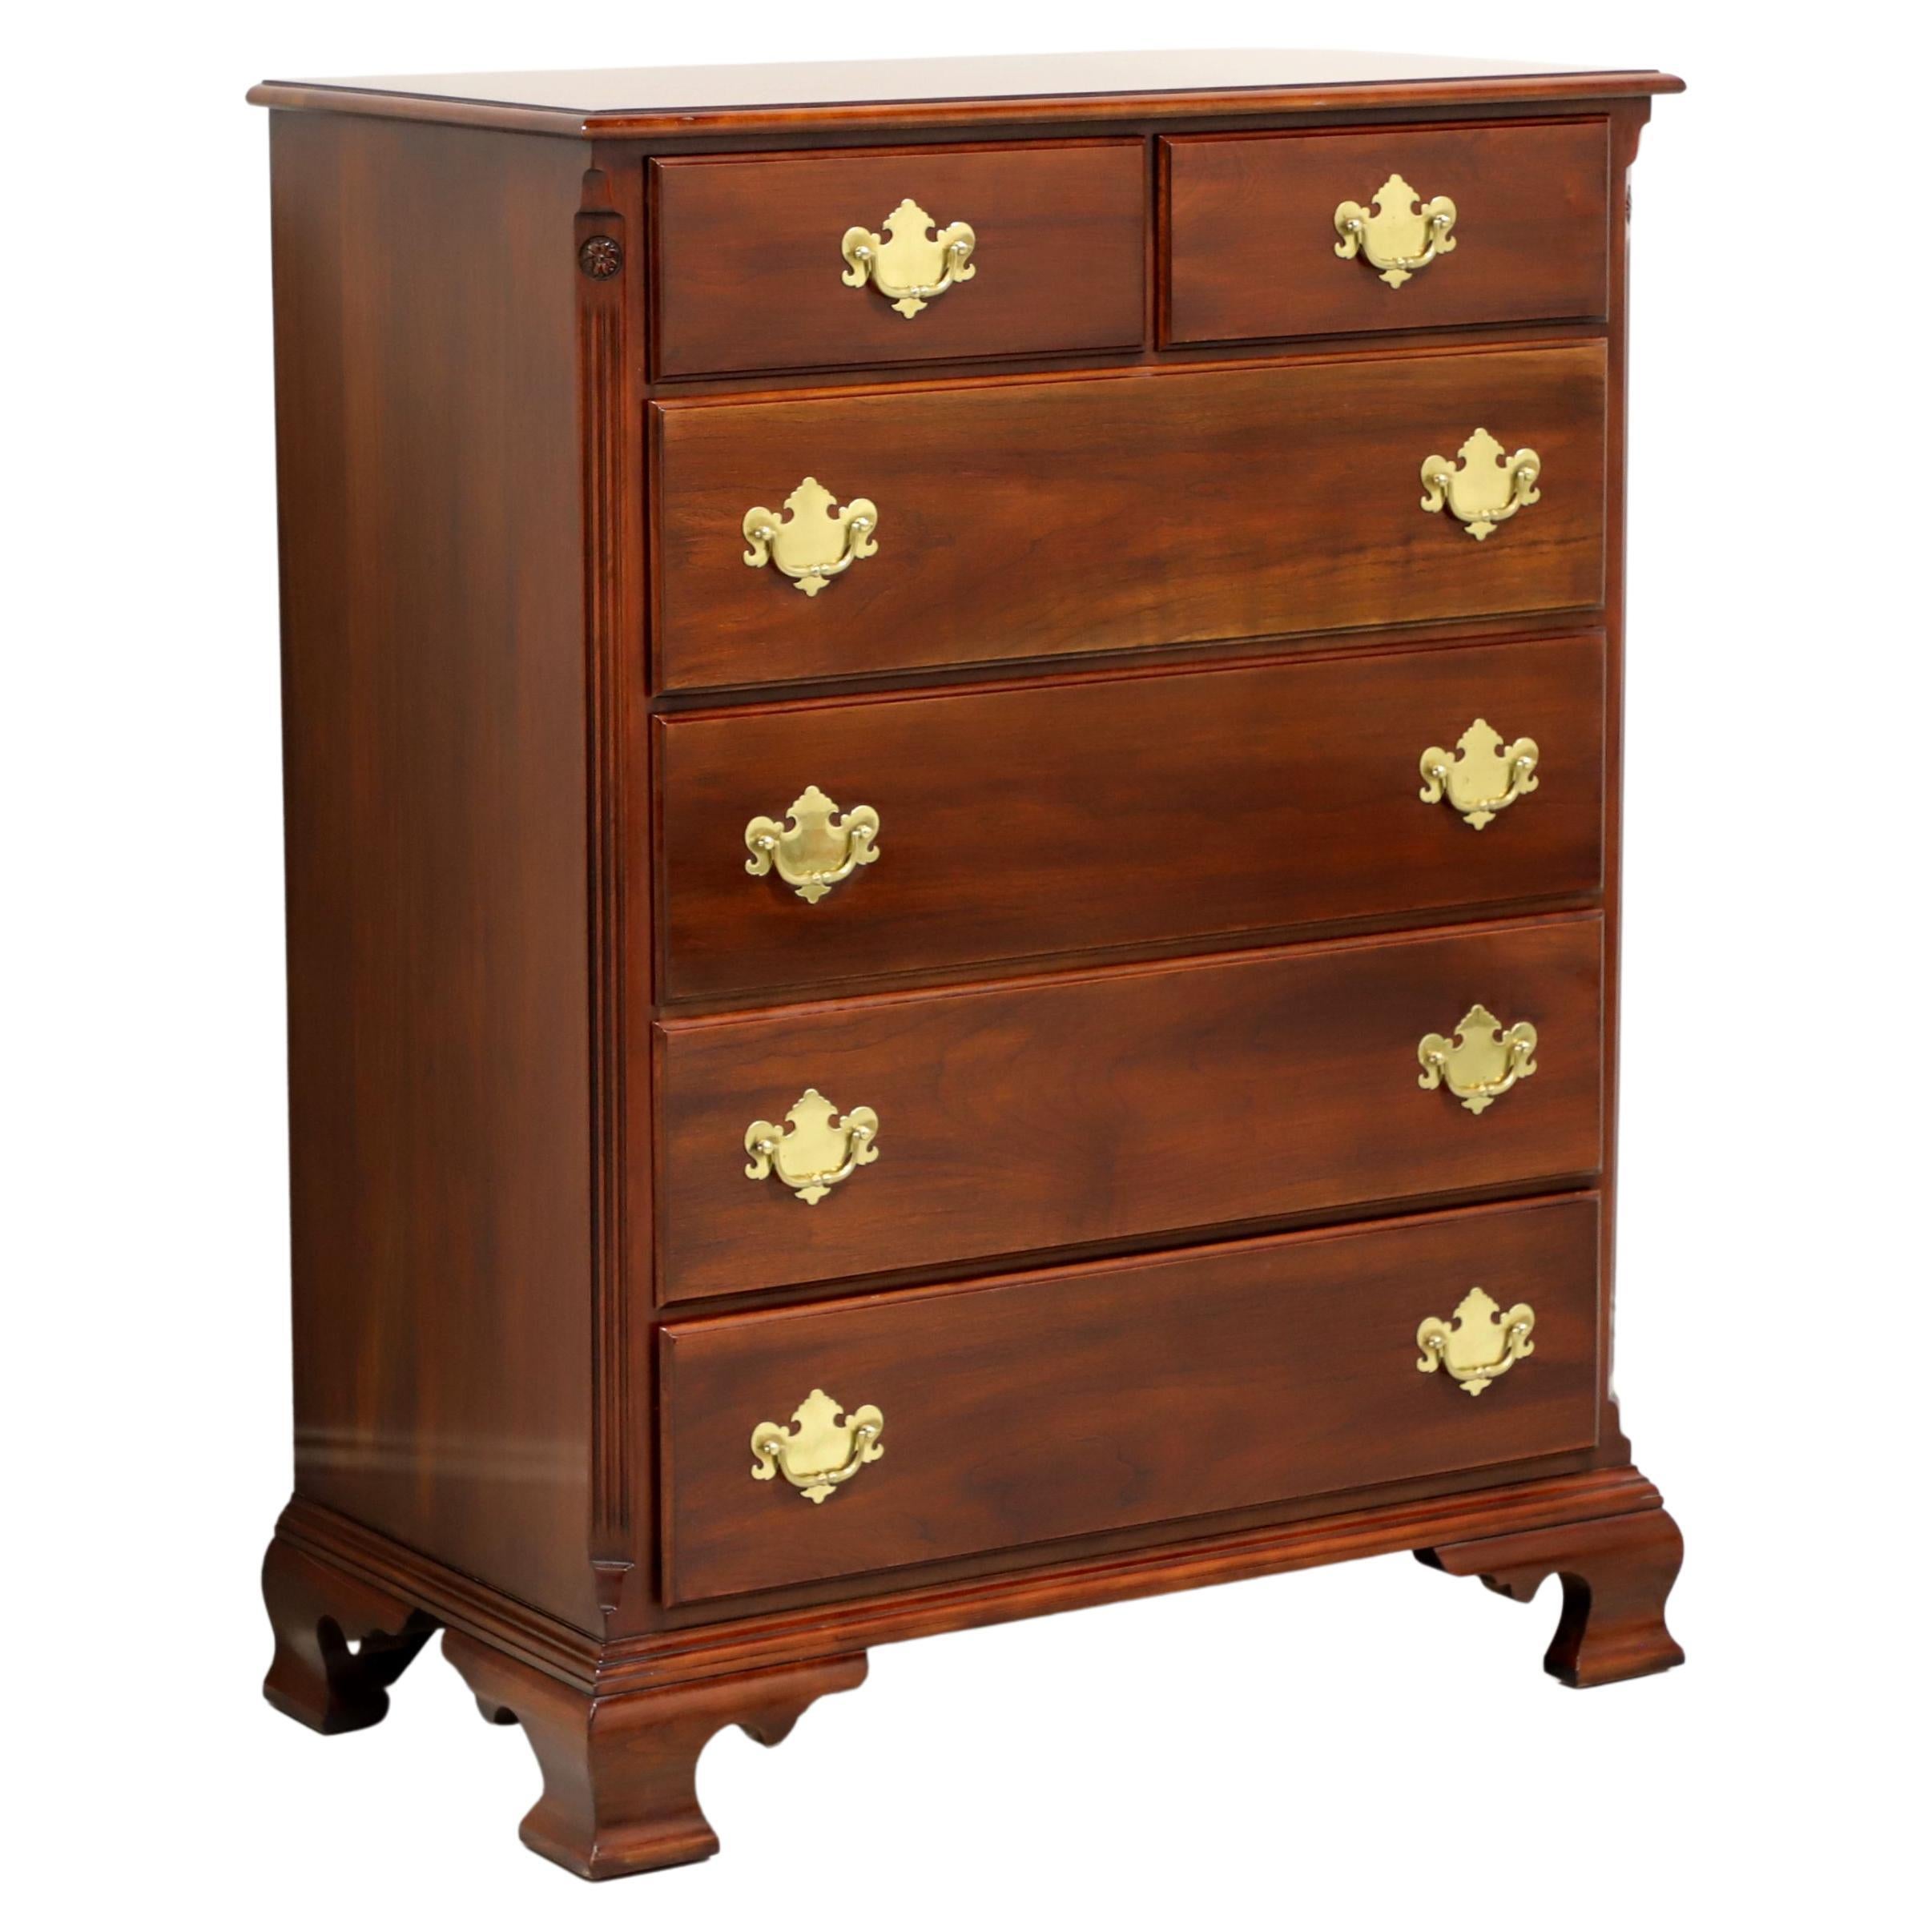 STATTON Centennial Cherry Chippendale Style Chest of Drawers